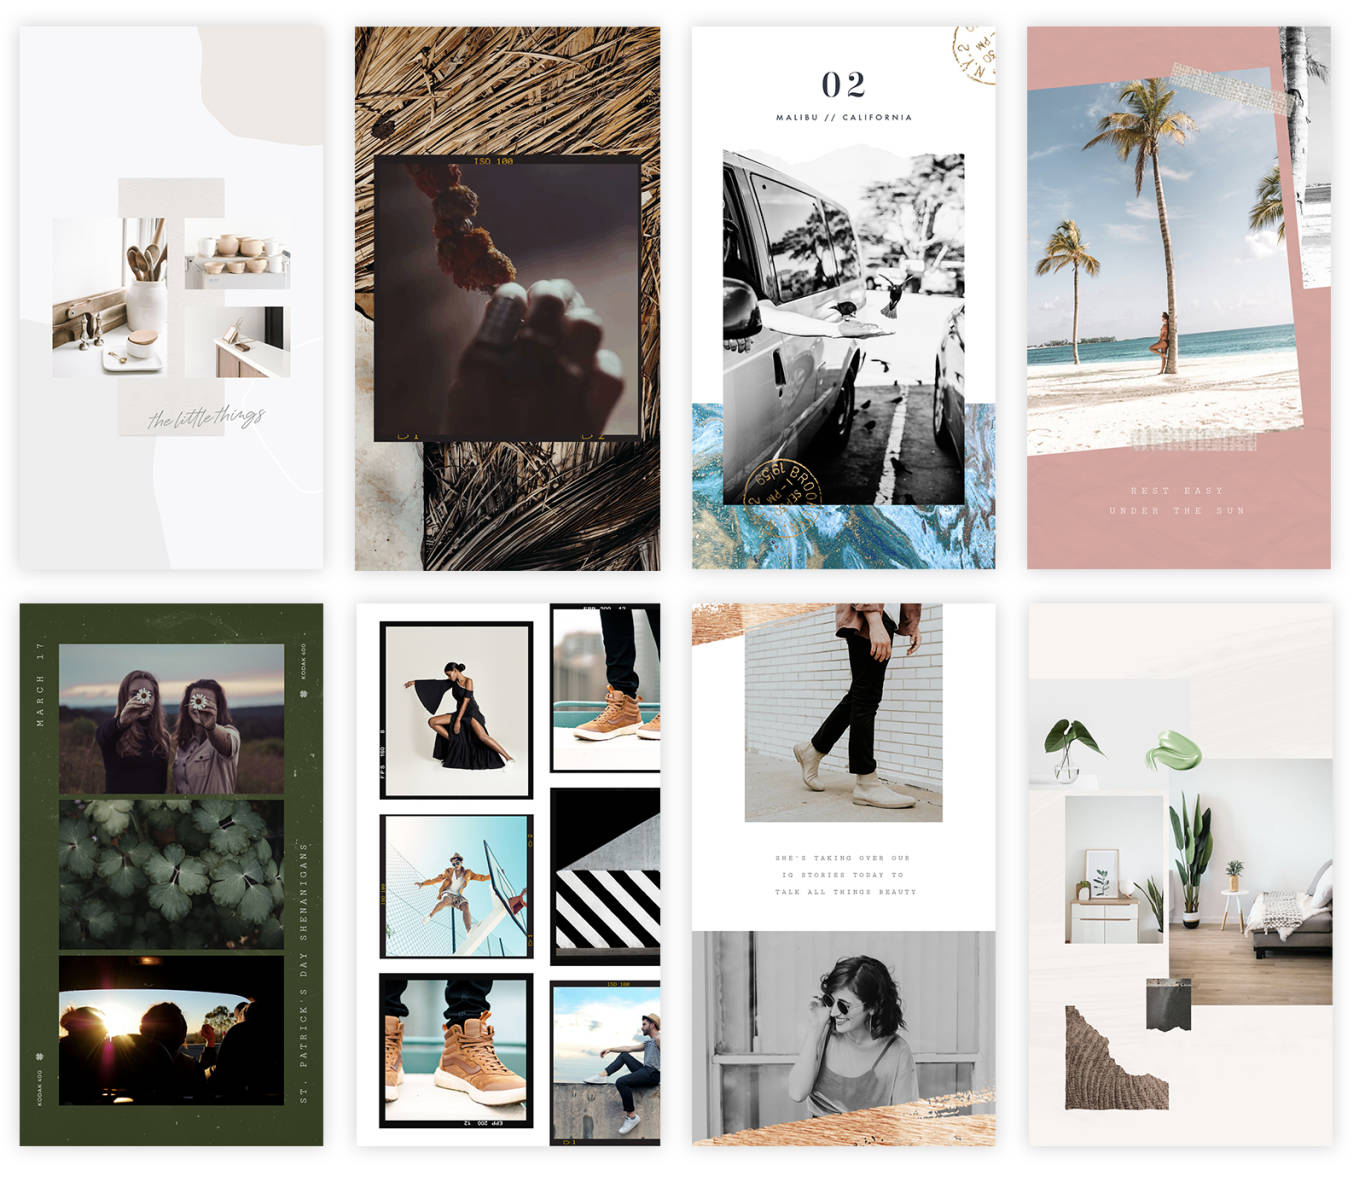 How to Make an Instagram Story Collage | Get the Look | PicMonkey